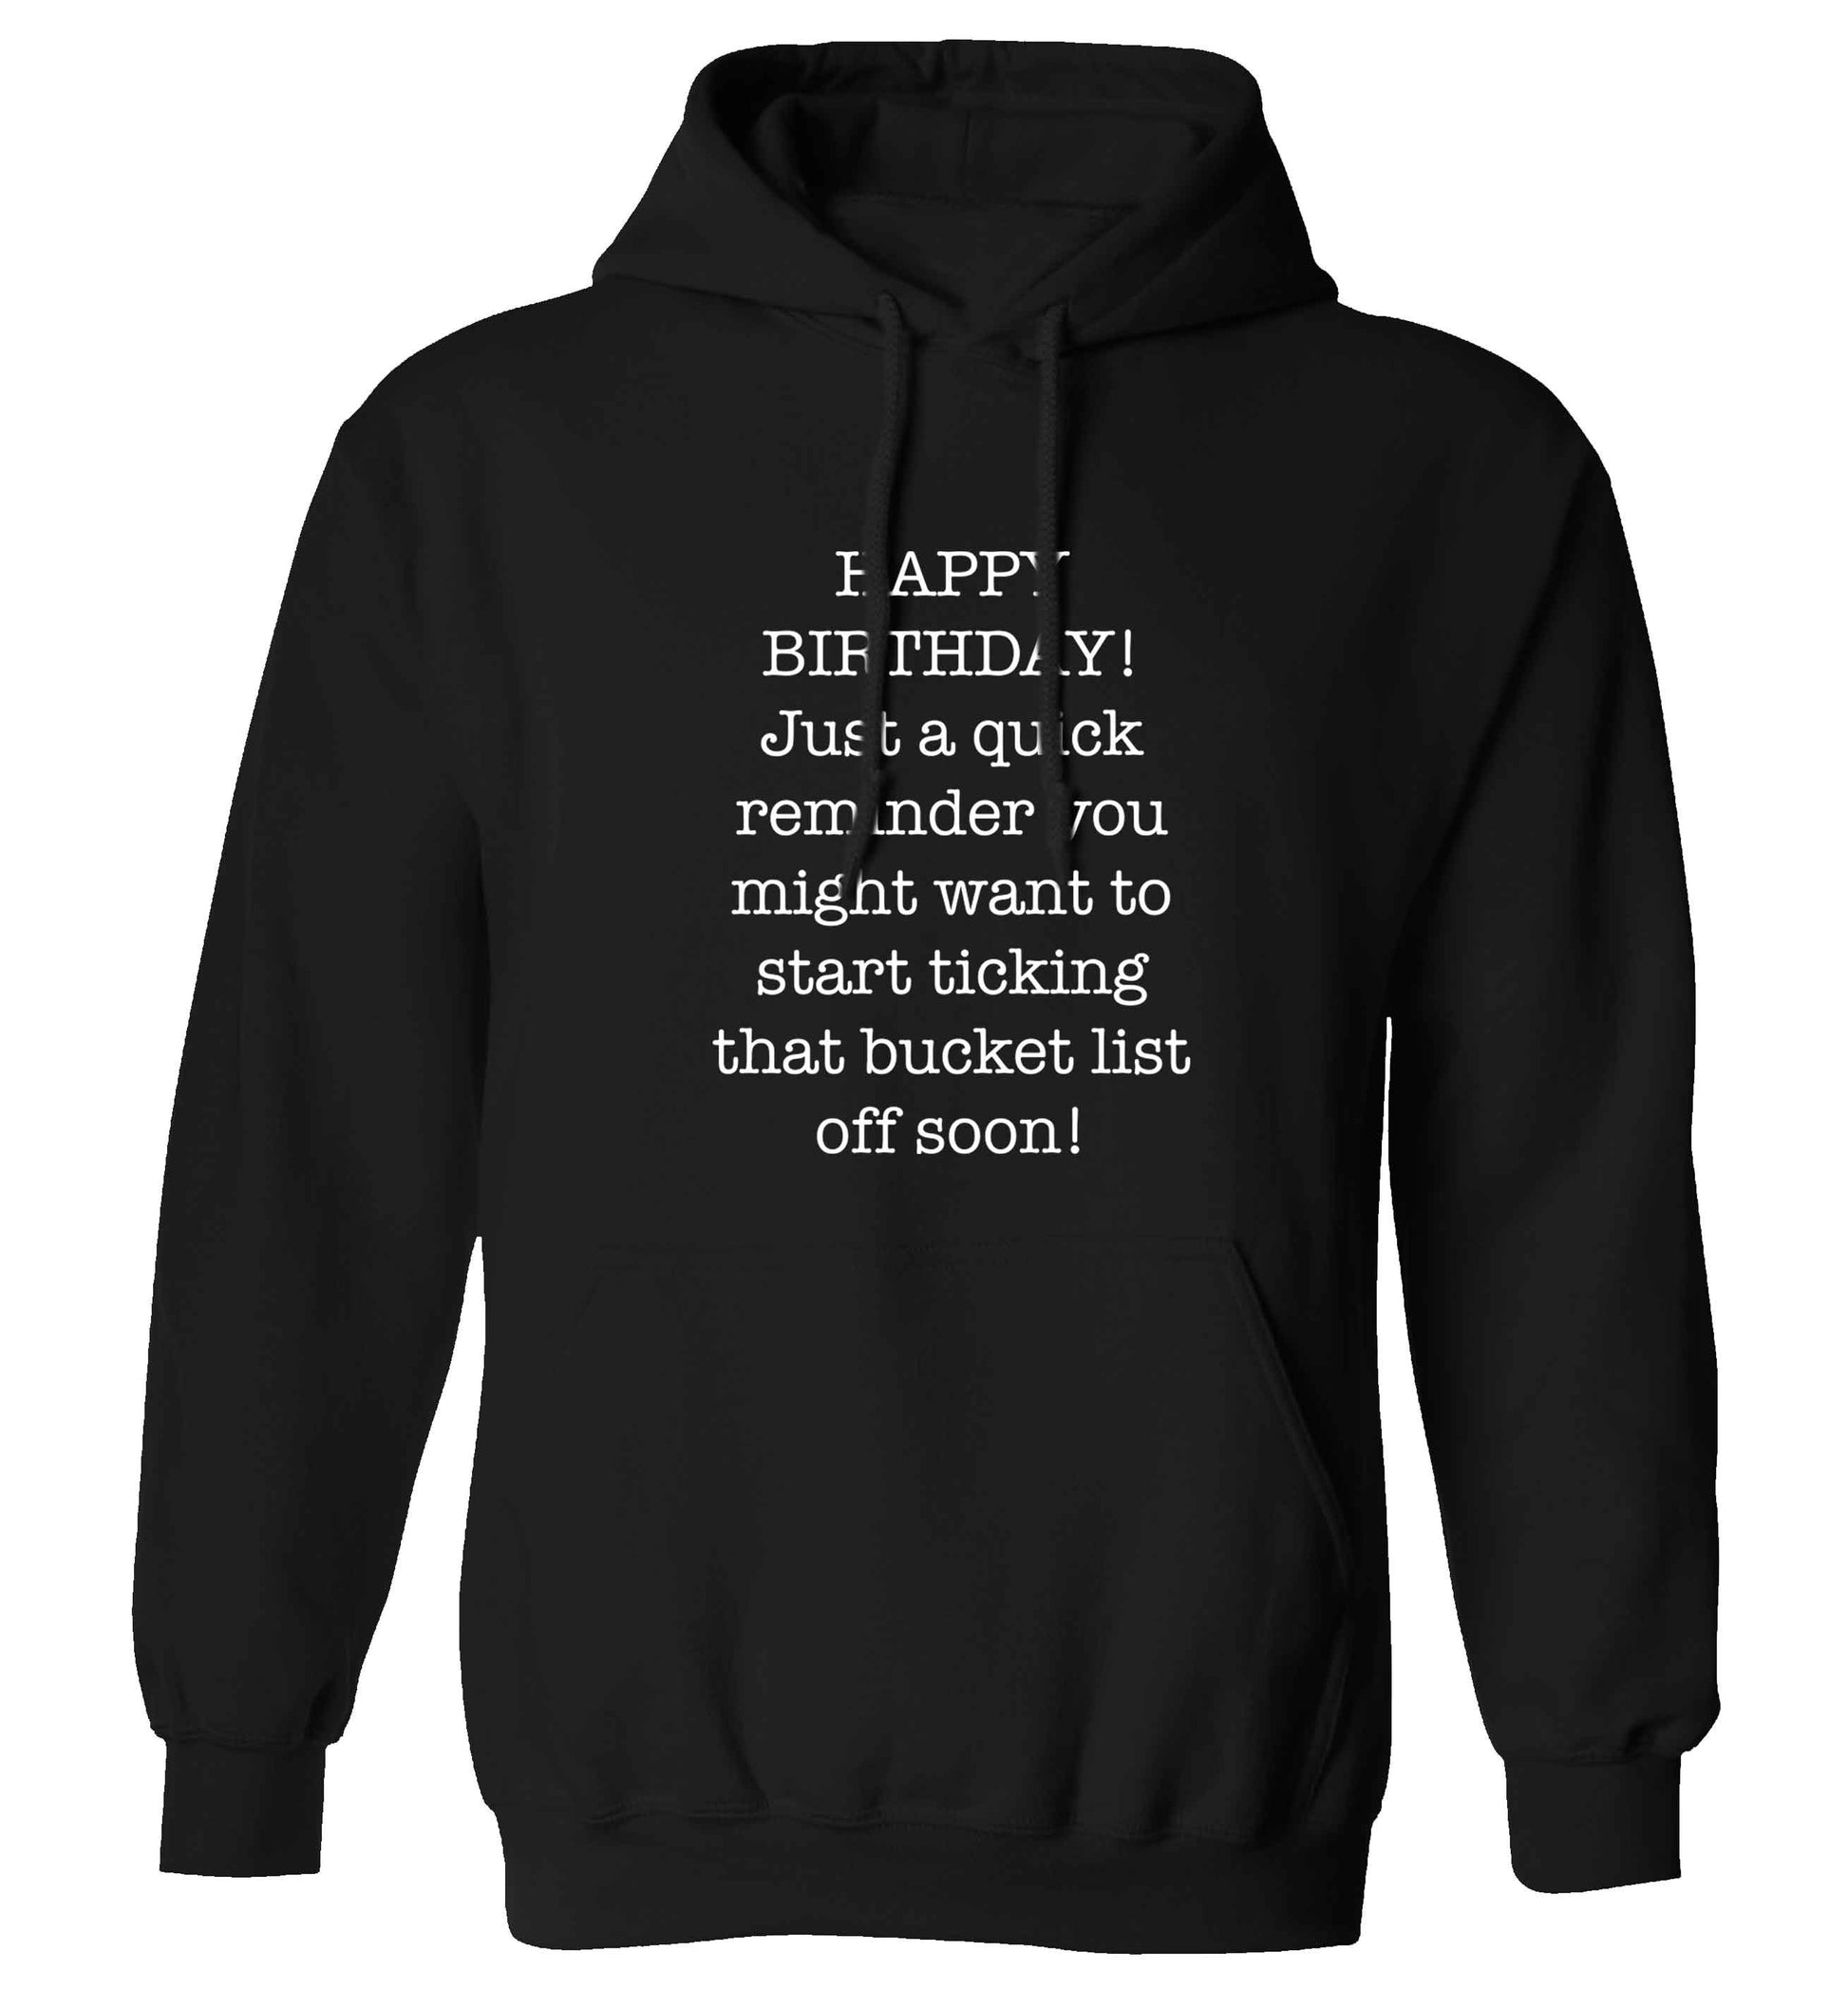 Happy birthday, just a quick reminder you might want to start ticking that bucket list off soon adults unisex black hoodie 2XL